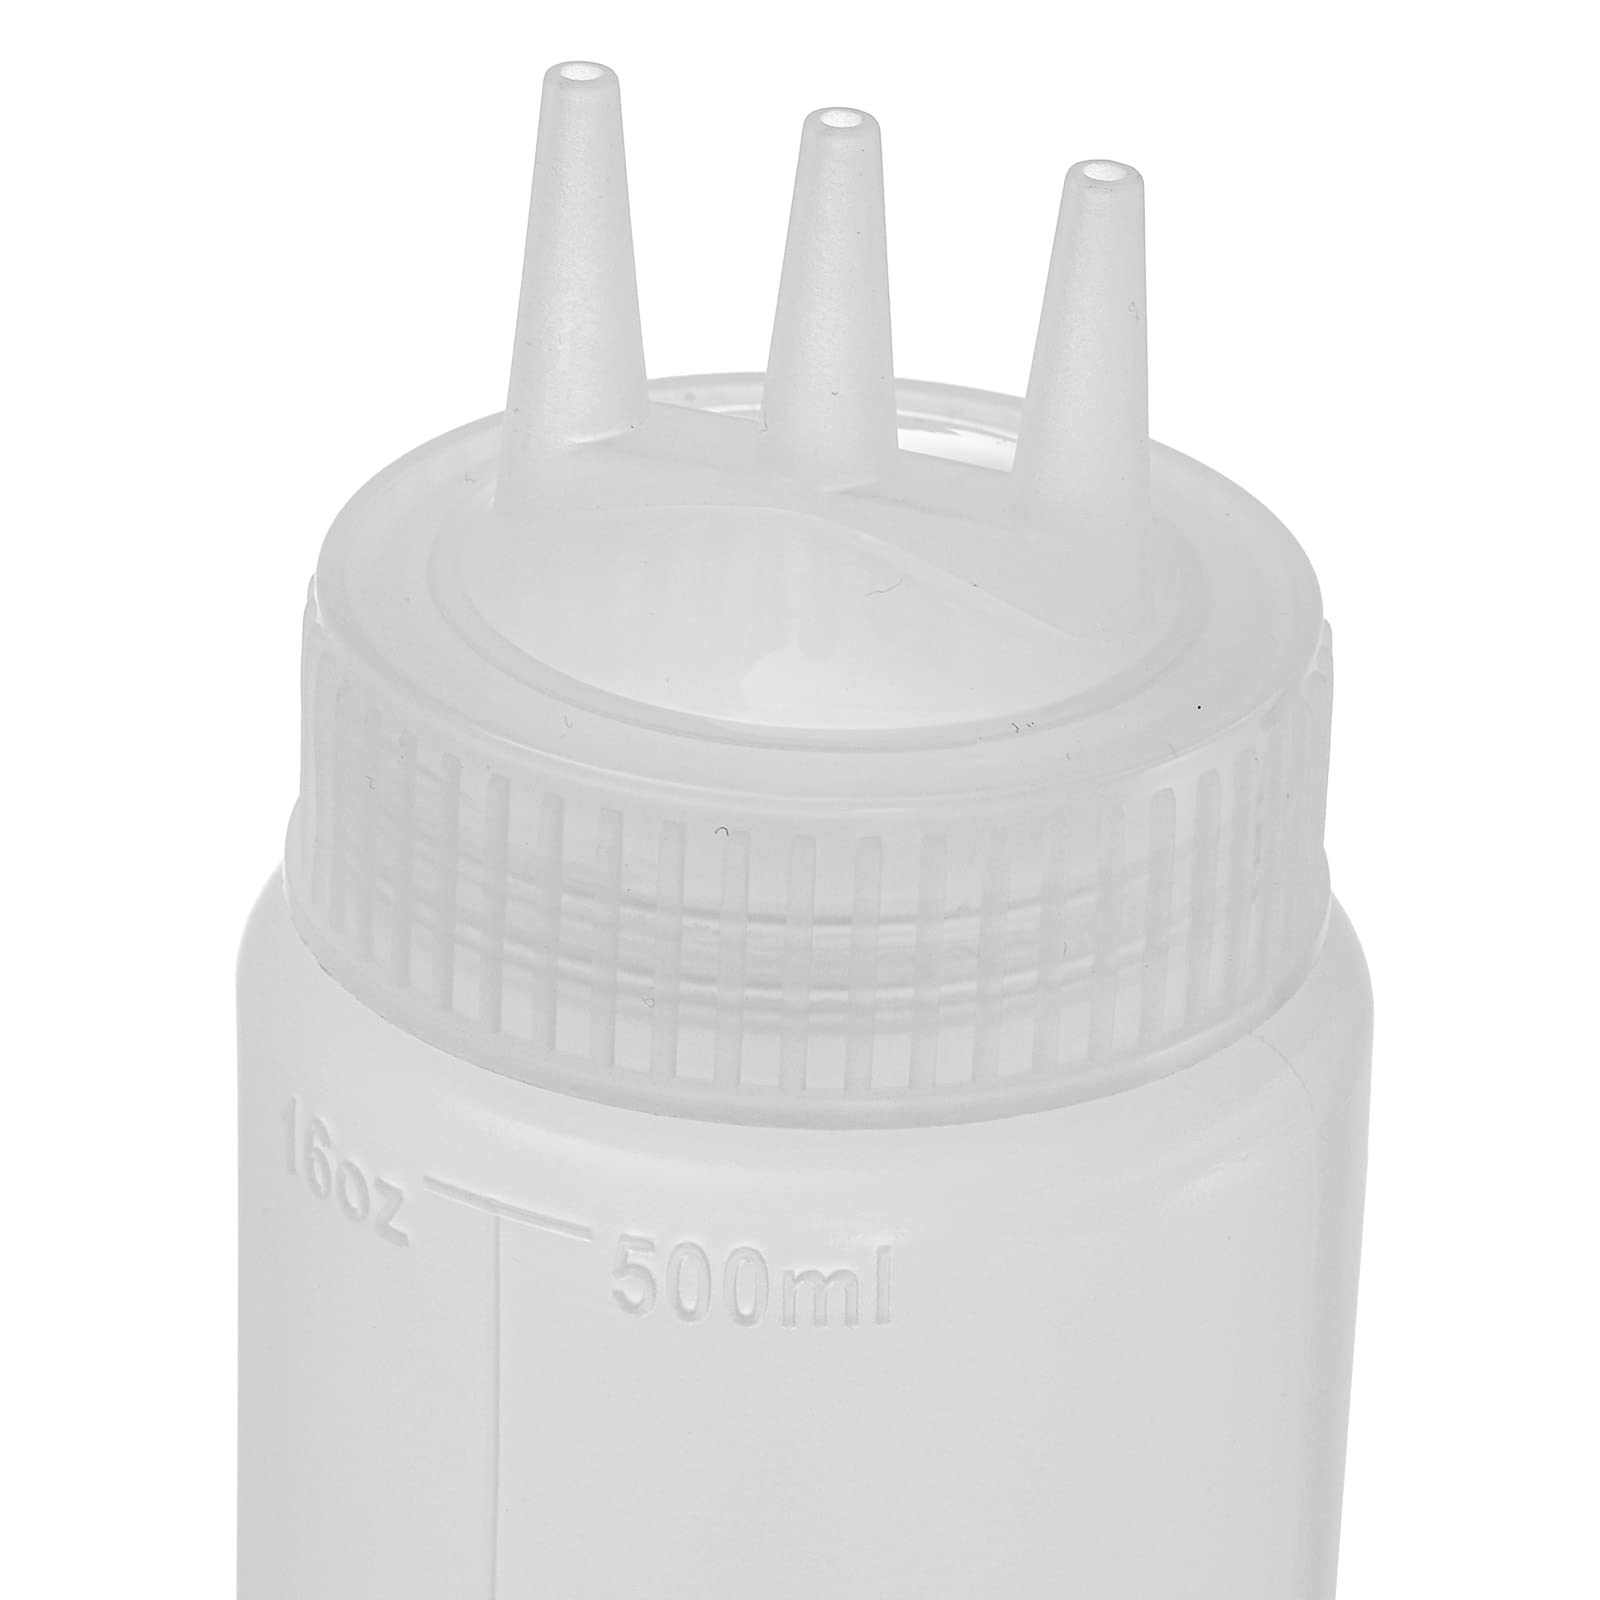 SOUJOY 16 Pack Condiment Squeeze Bottle, 16 Oz 3-Hole Kitchen Ketchup Squirt Bottle with Nozzle Tip and Label, Plastic Dispenser Container for Sauces, Paint, Oil, Salad Dressings, Arts and Crafts